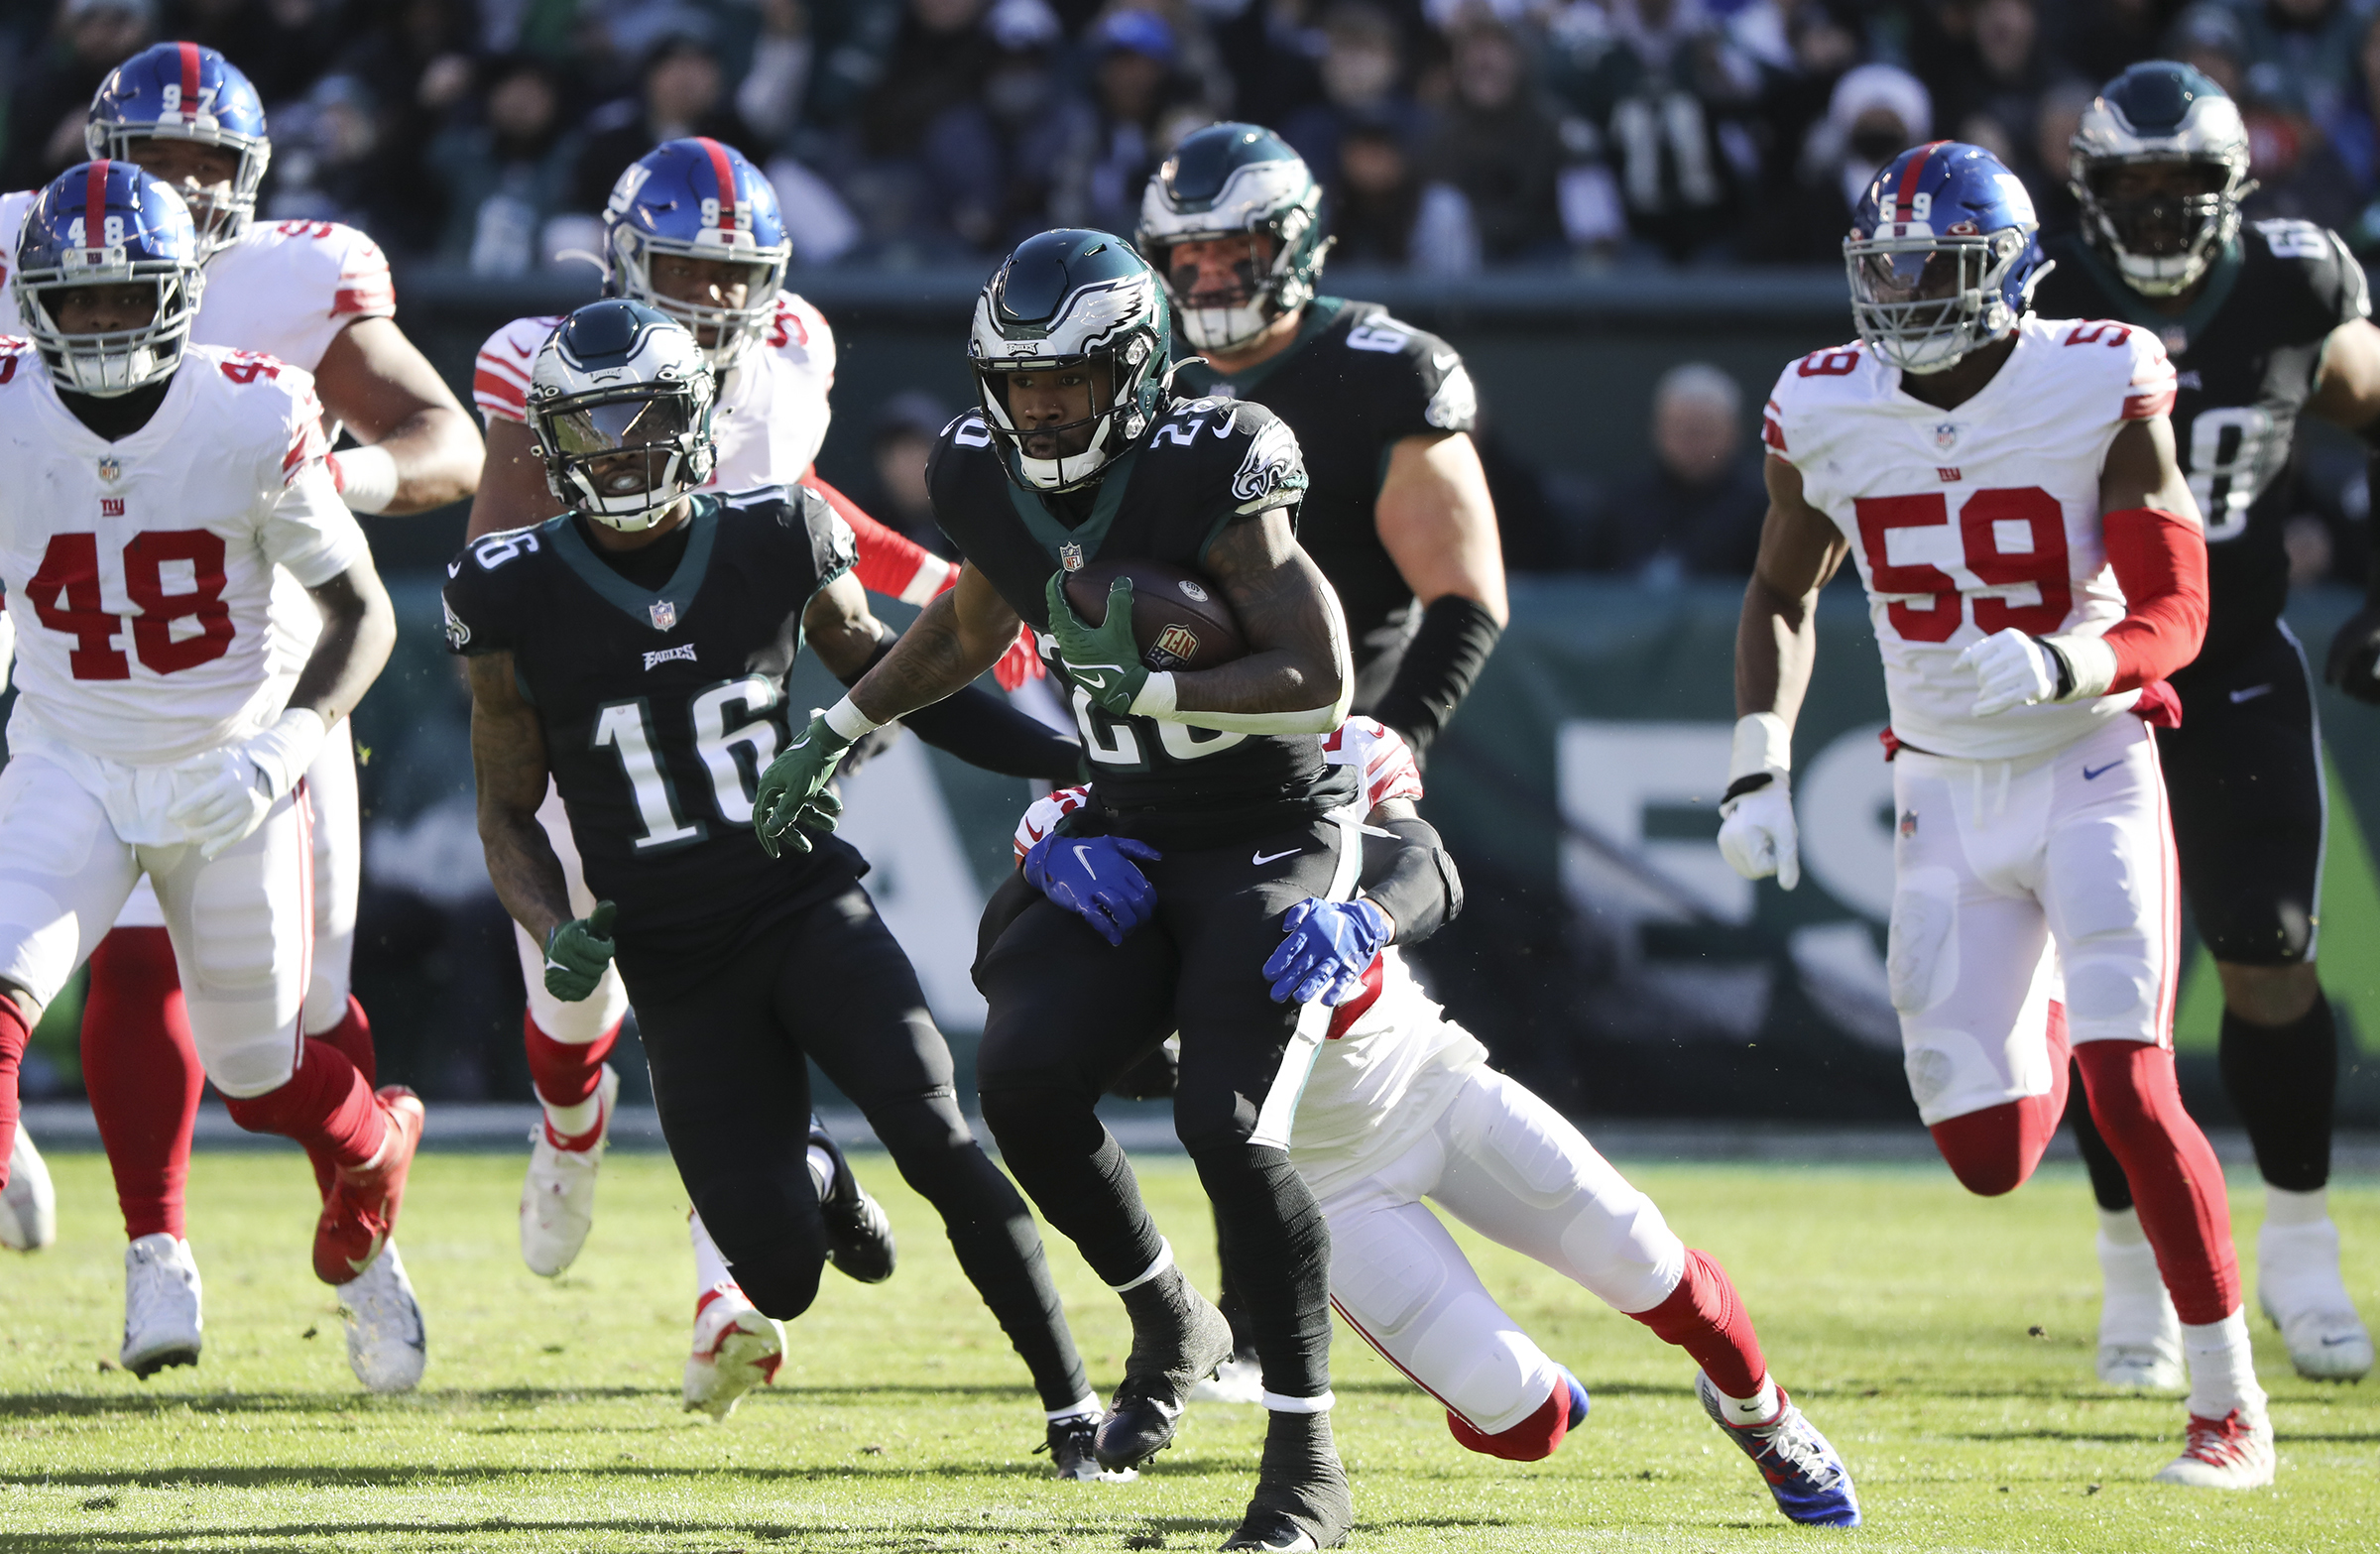 10 standouts from Eagles' 34-10 win over the Giants in Week 16